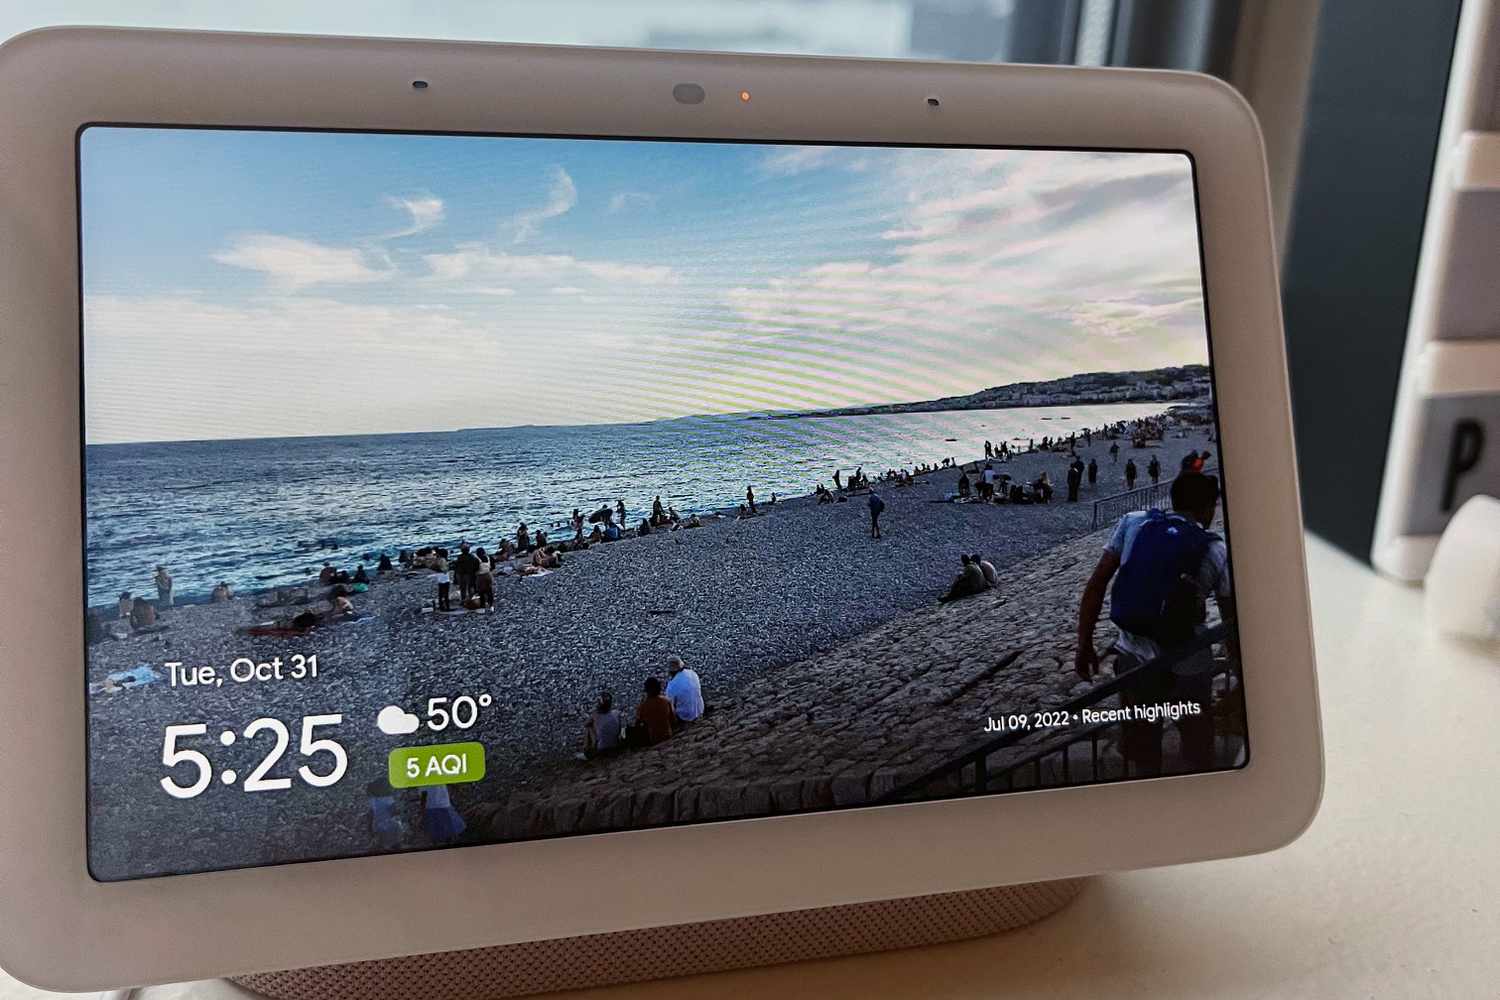 The Google Nest Hub 2nd Gen sitting on a window sill with a picture of a beach displayed.